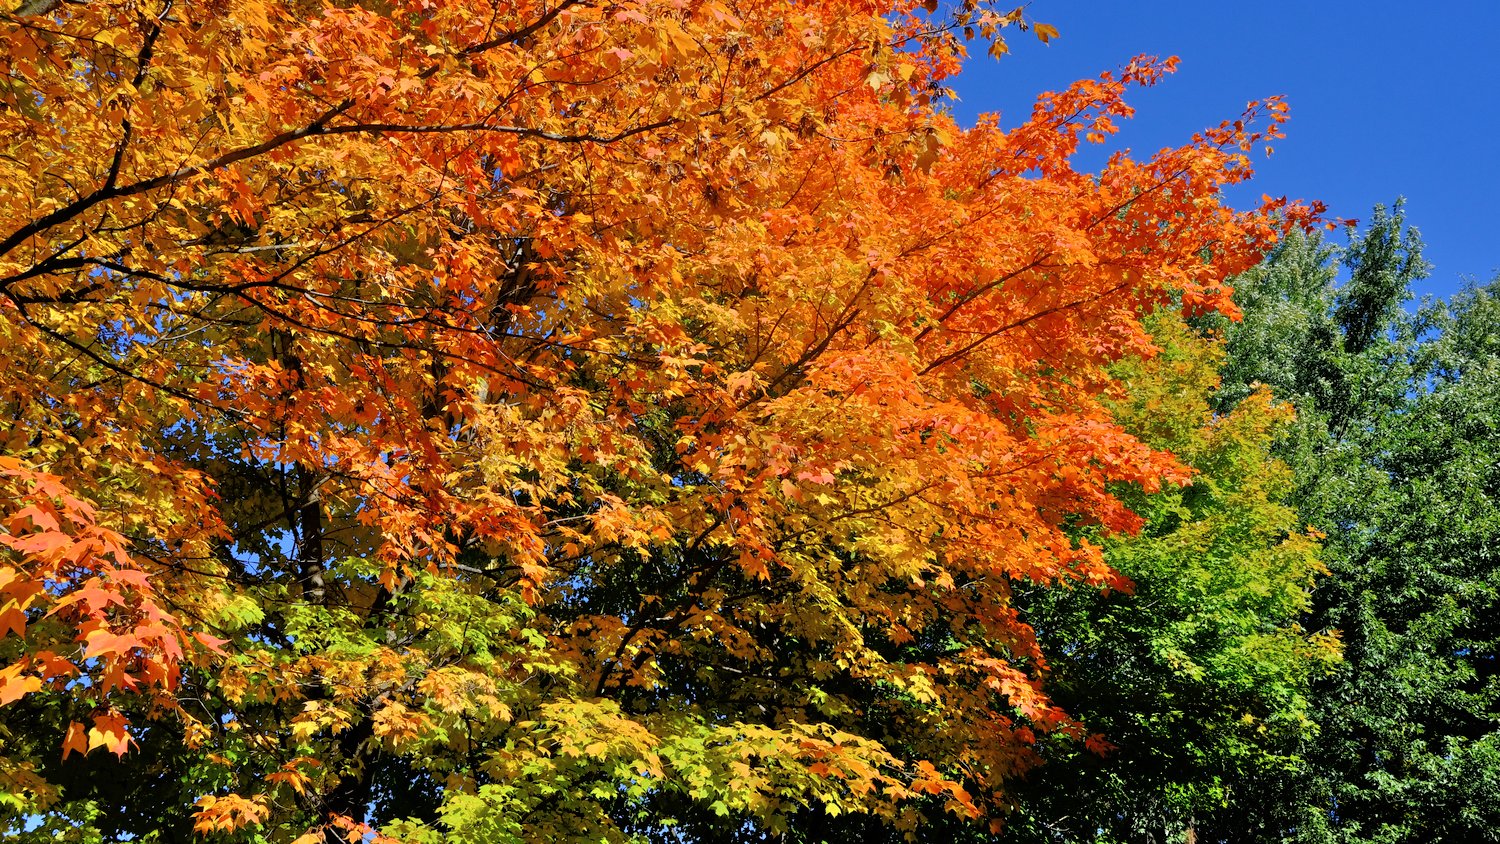 View of trees with autumn leaves.